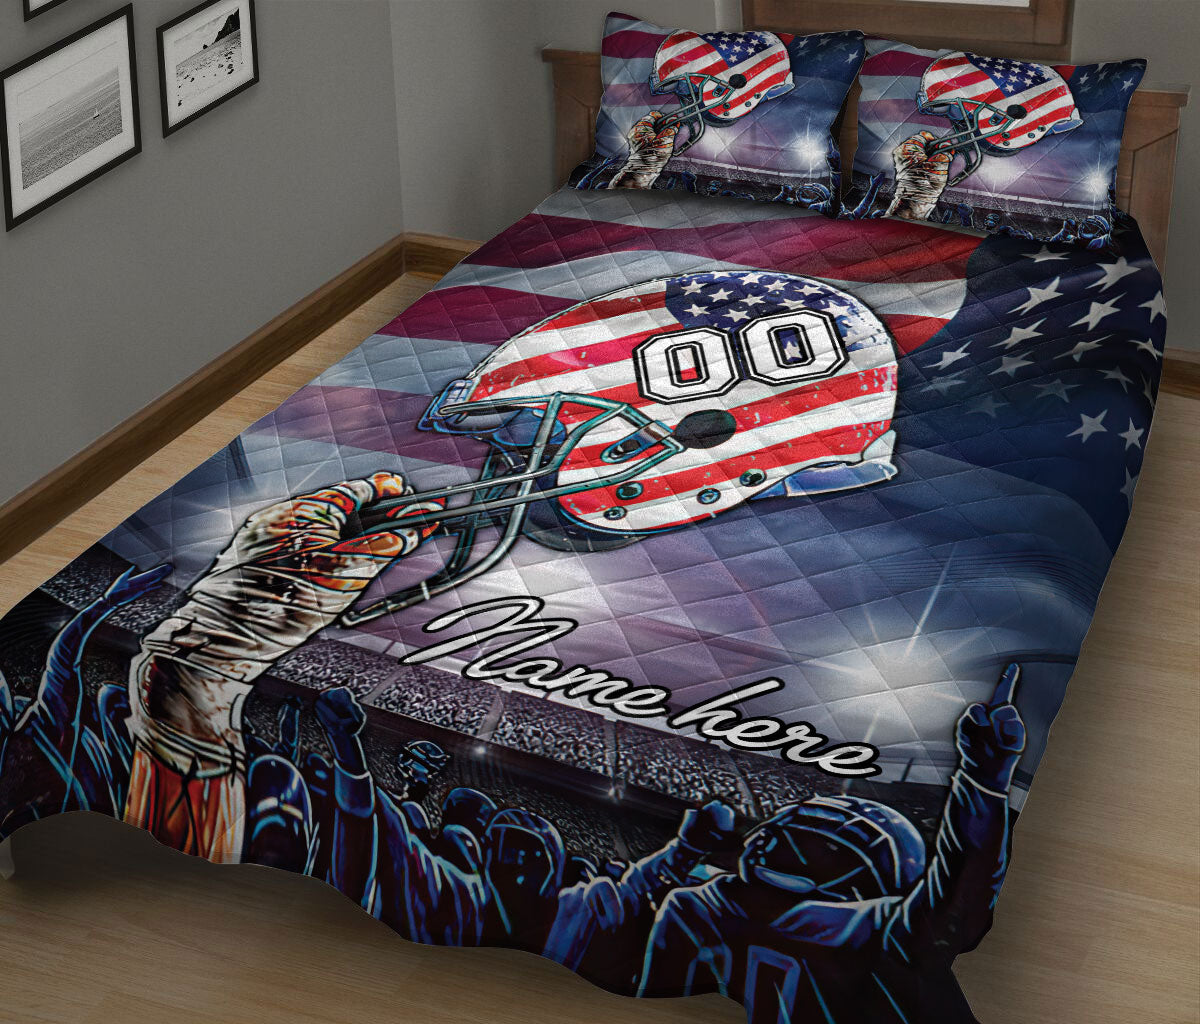 Ohaprints-Quilt-Bed-Set-Pillowcase-America-Us-Flag-Football-Player-Gift-Helmet-Custom-Personalized-Name-Number-Blanket-Bedspread-Bedding-254-King (90'' x 100'')